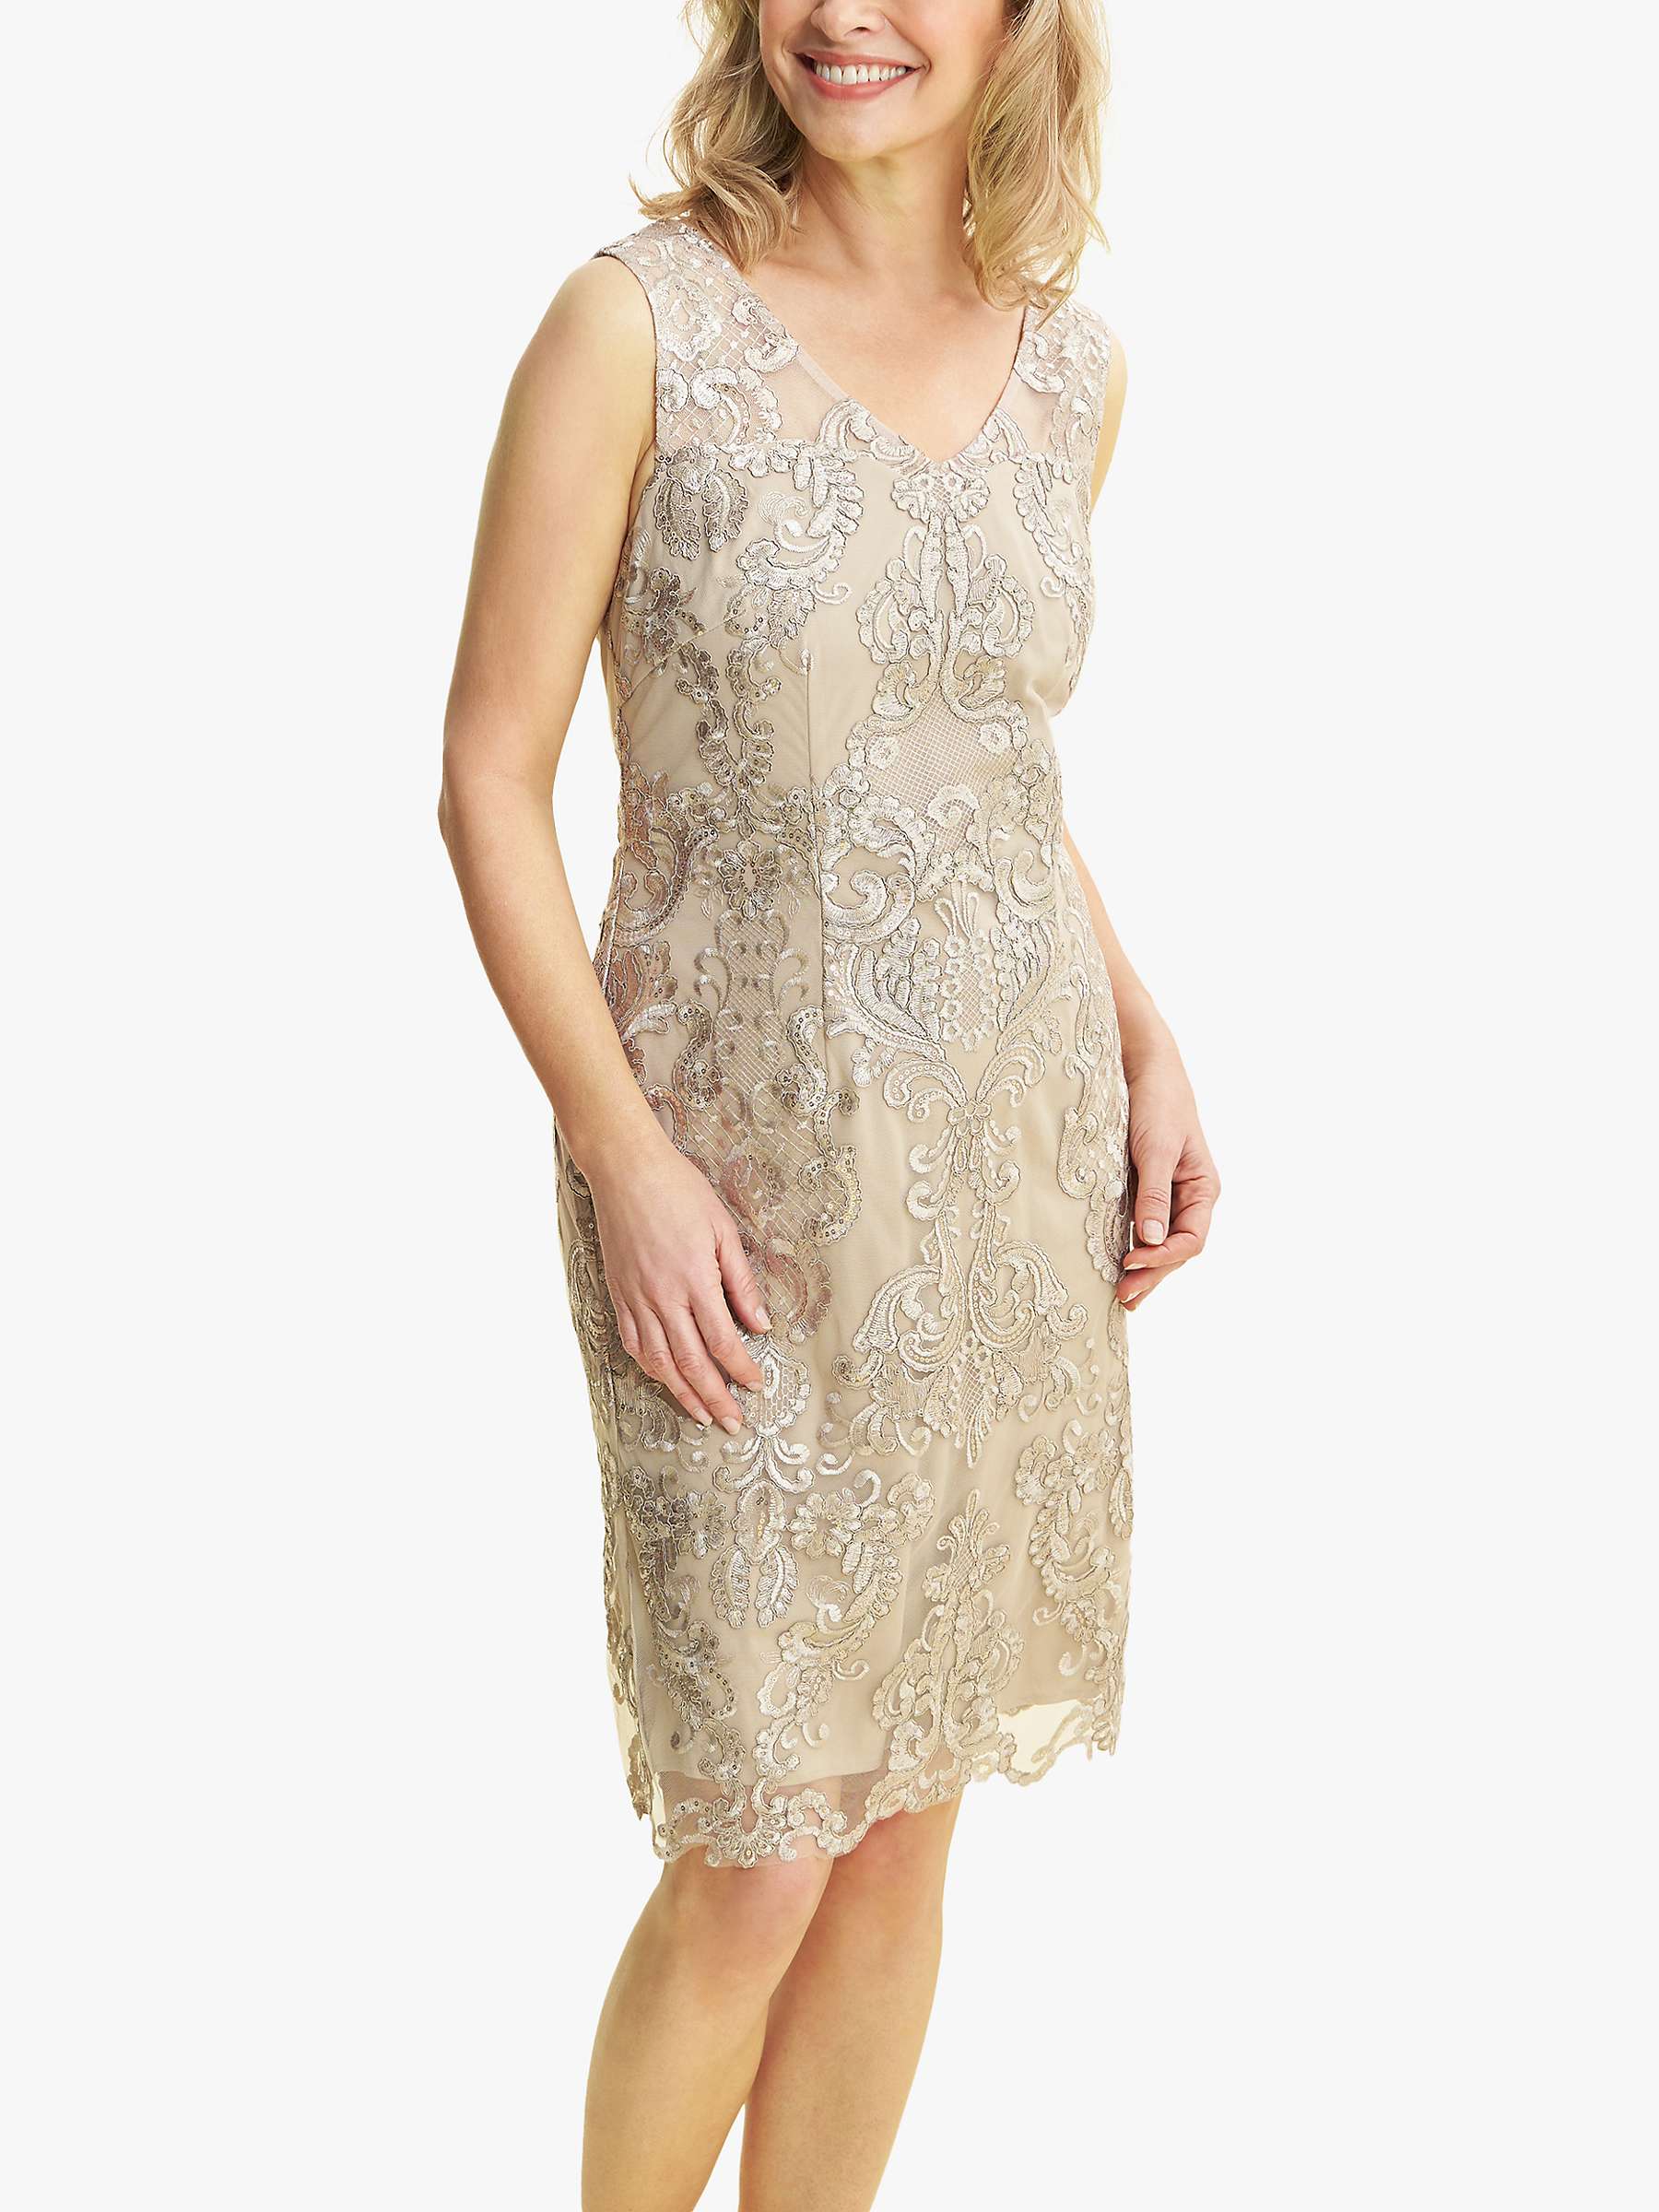 Buy Gina Bacconi Joss Metallic Embroidered Lace Dress with Chiffon Jacket, Taupe Online at johnlewis.com